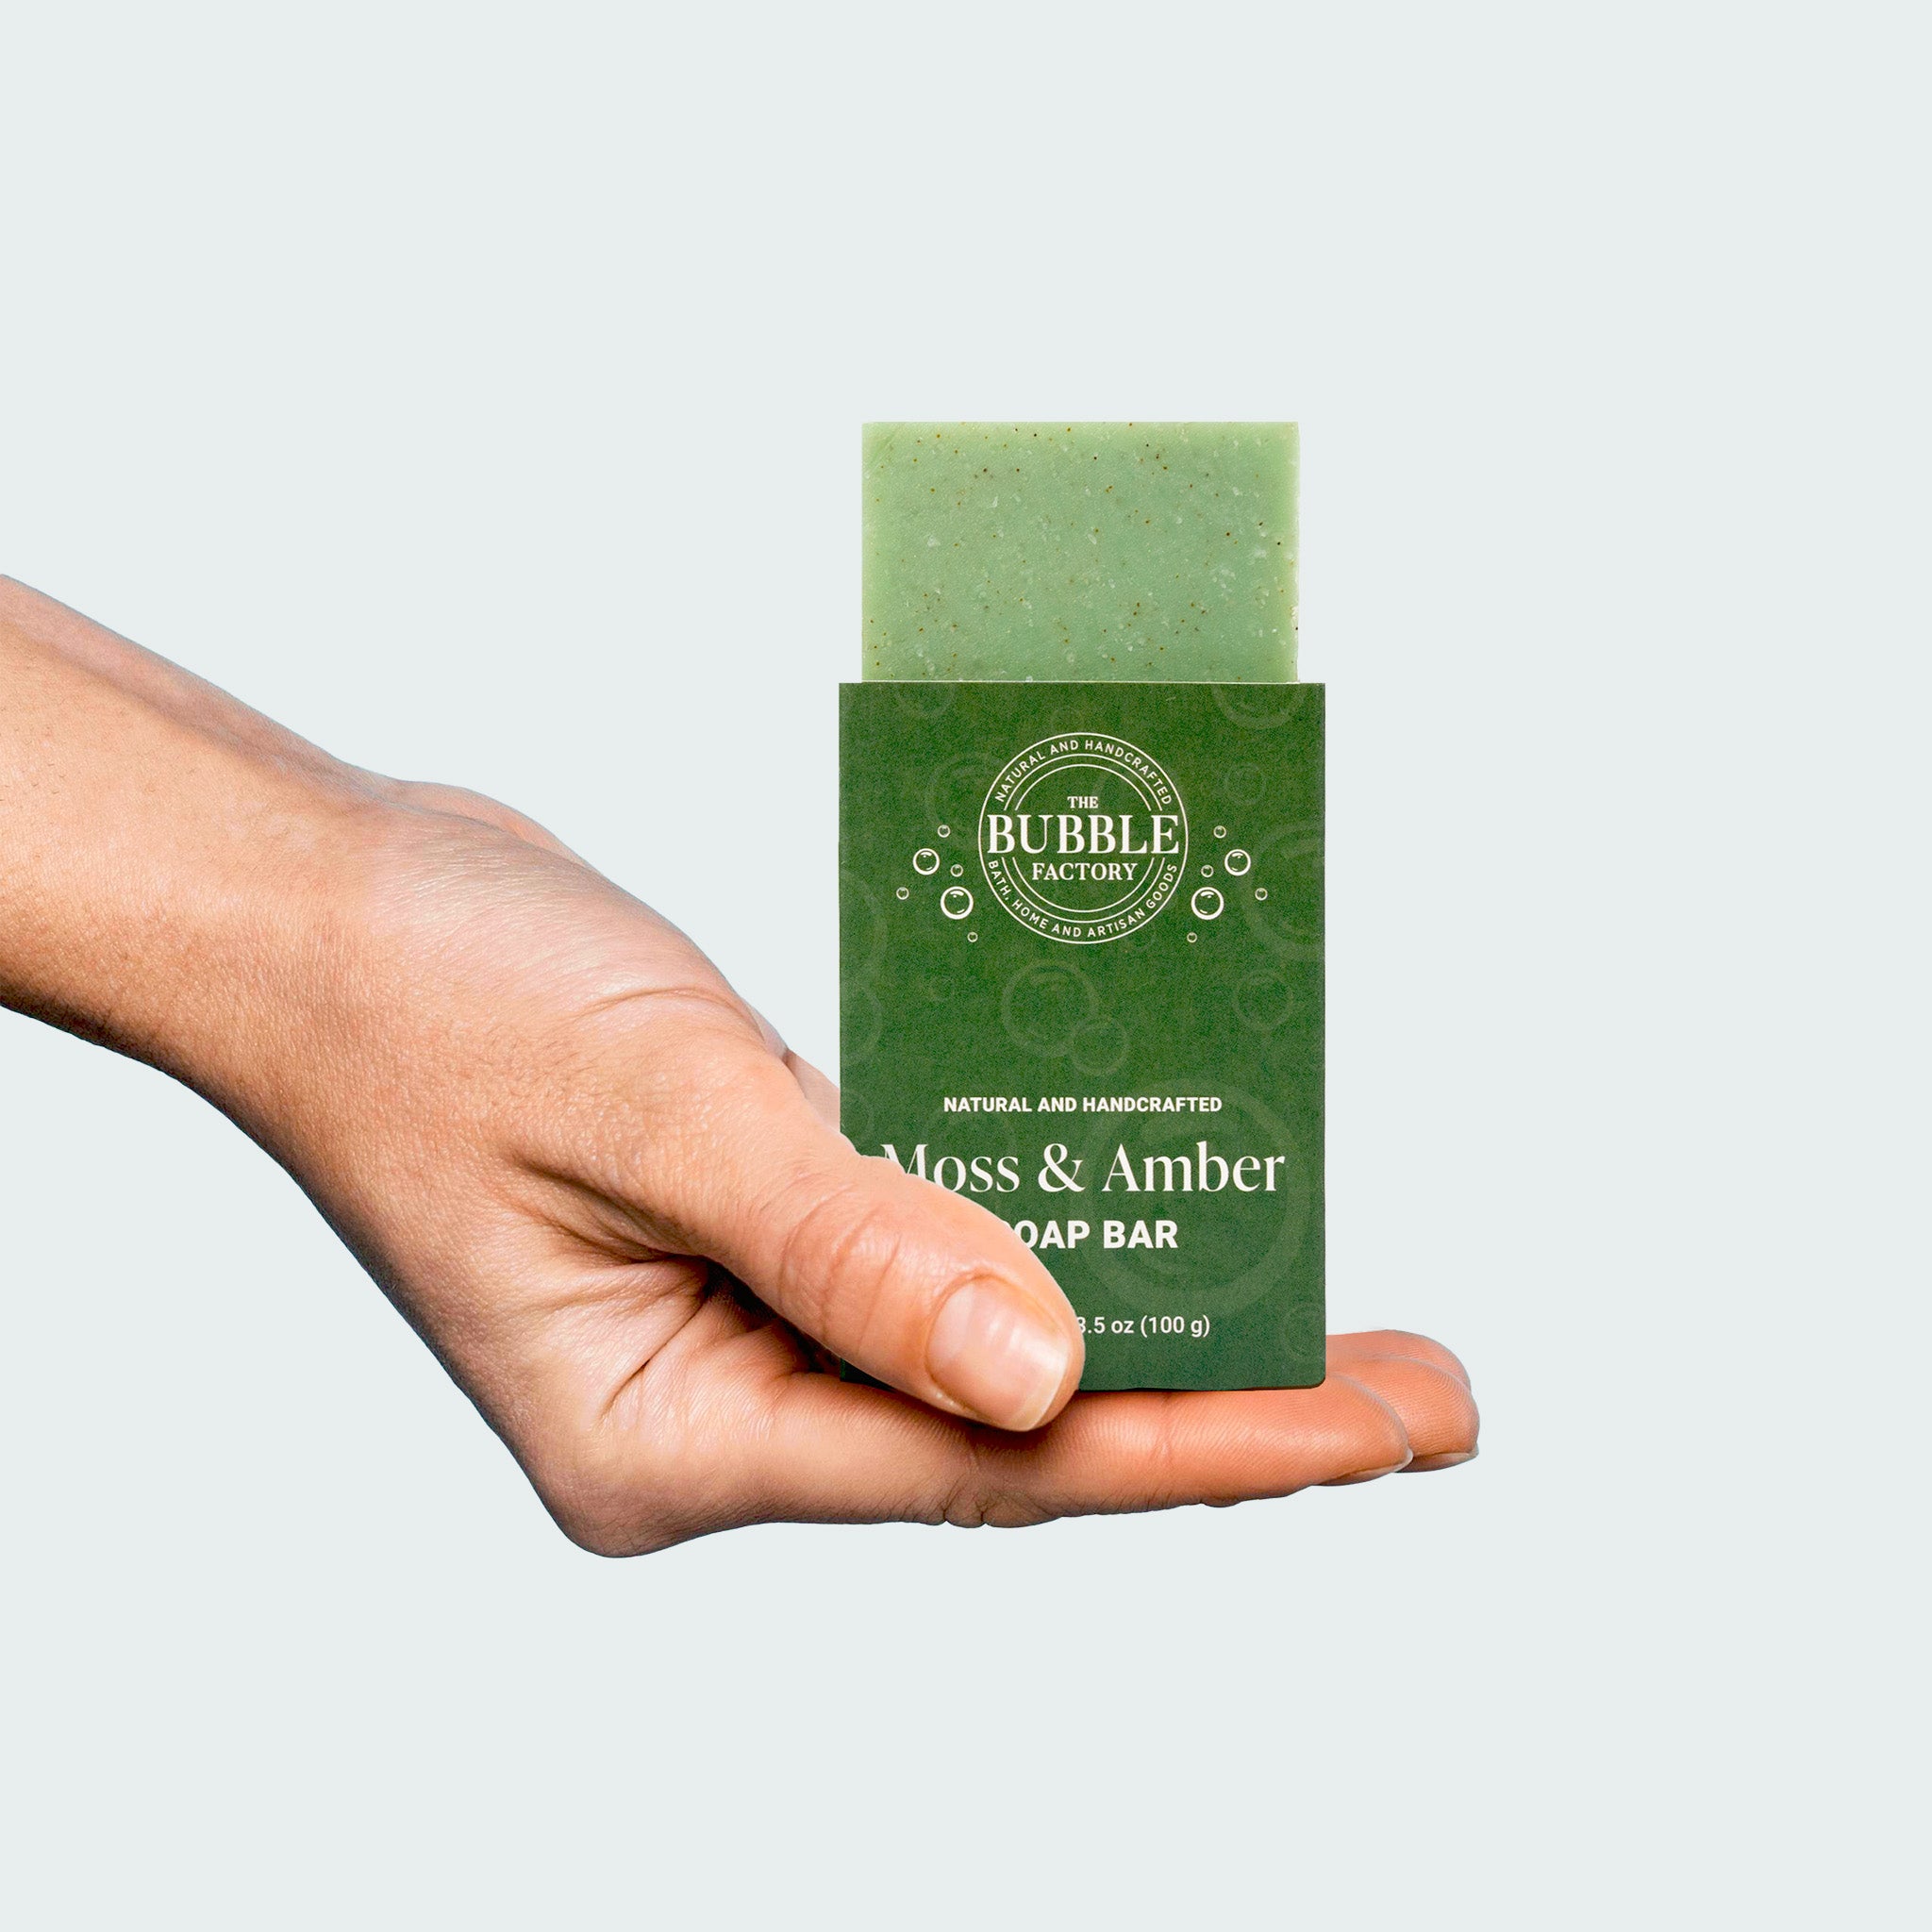 Moss Amber Soap Bar in Hand